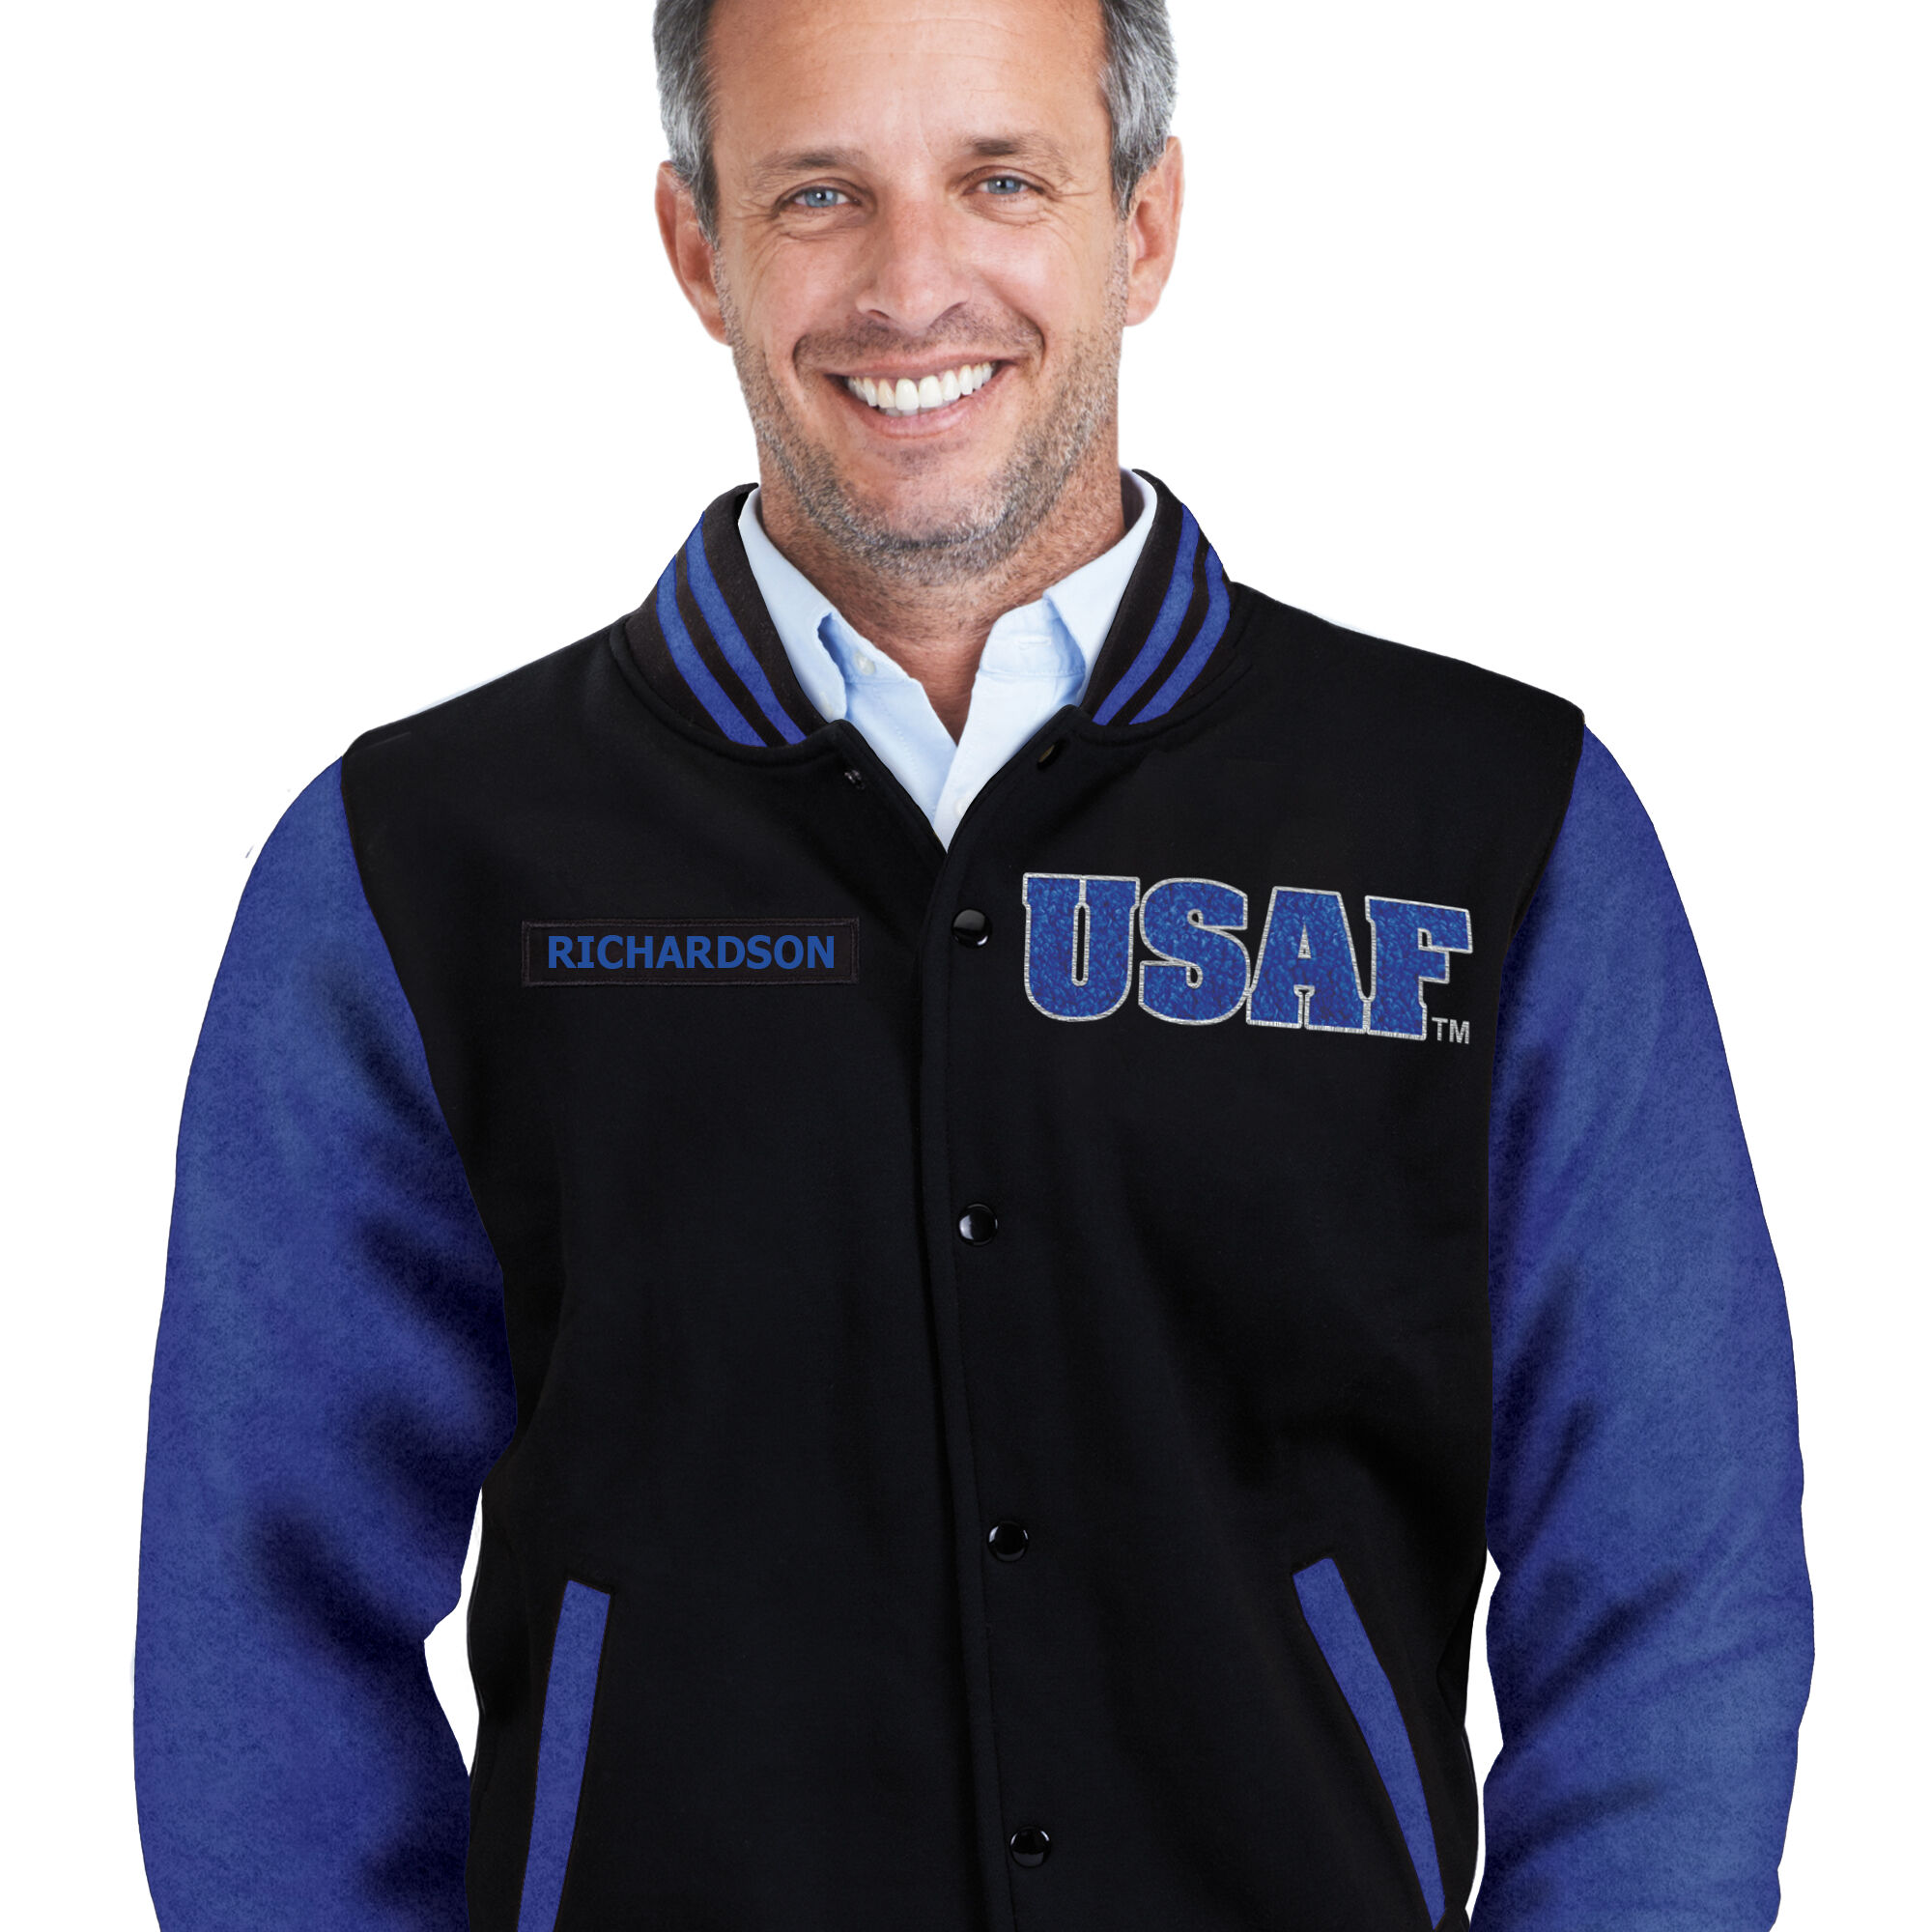 The Personalized US Air Force Varsity Jacket 10263 0035 m model